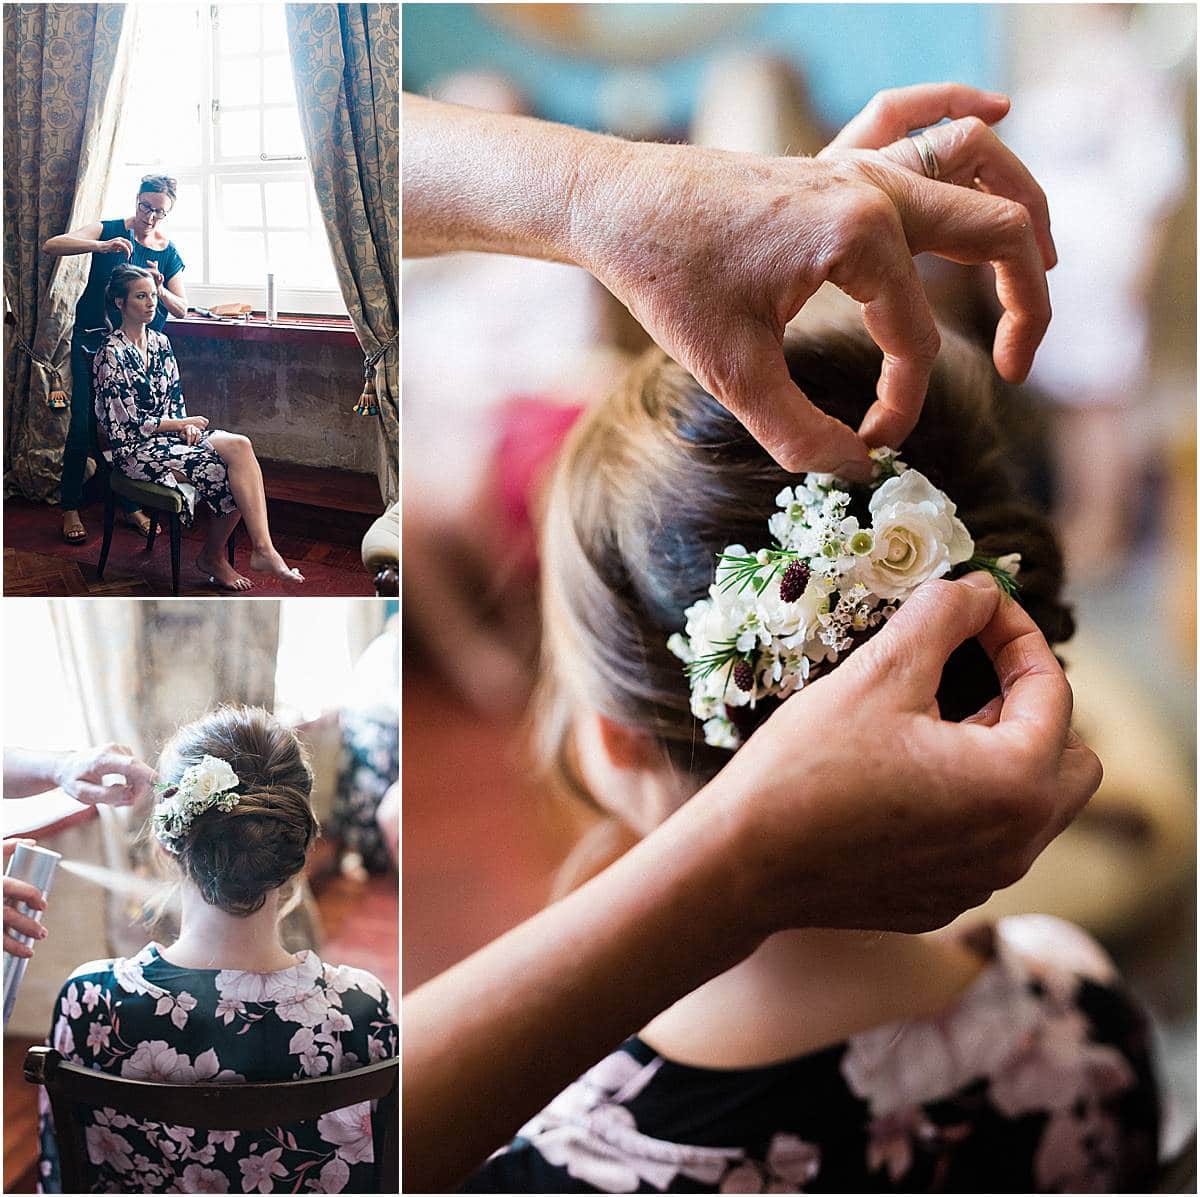 hair style on the wedding at chateau de la ligne with pixaile photography french wedding photographer in gironde near Bordeaux